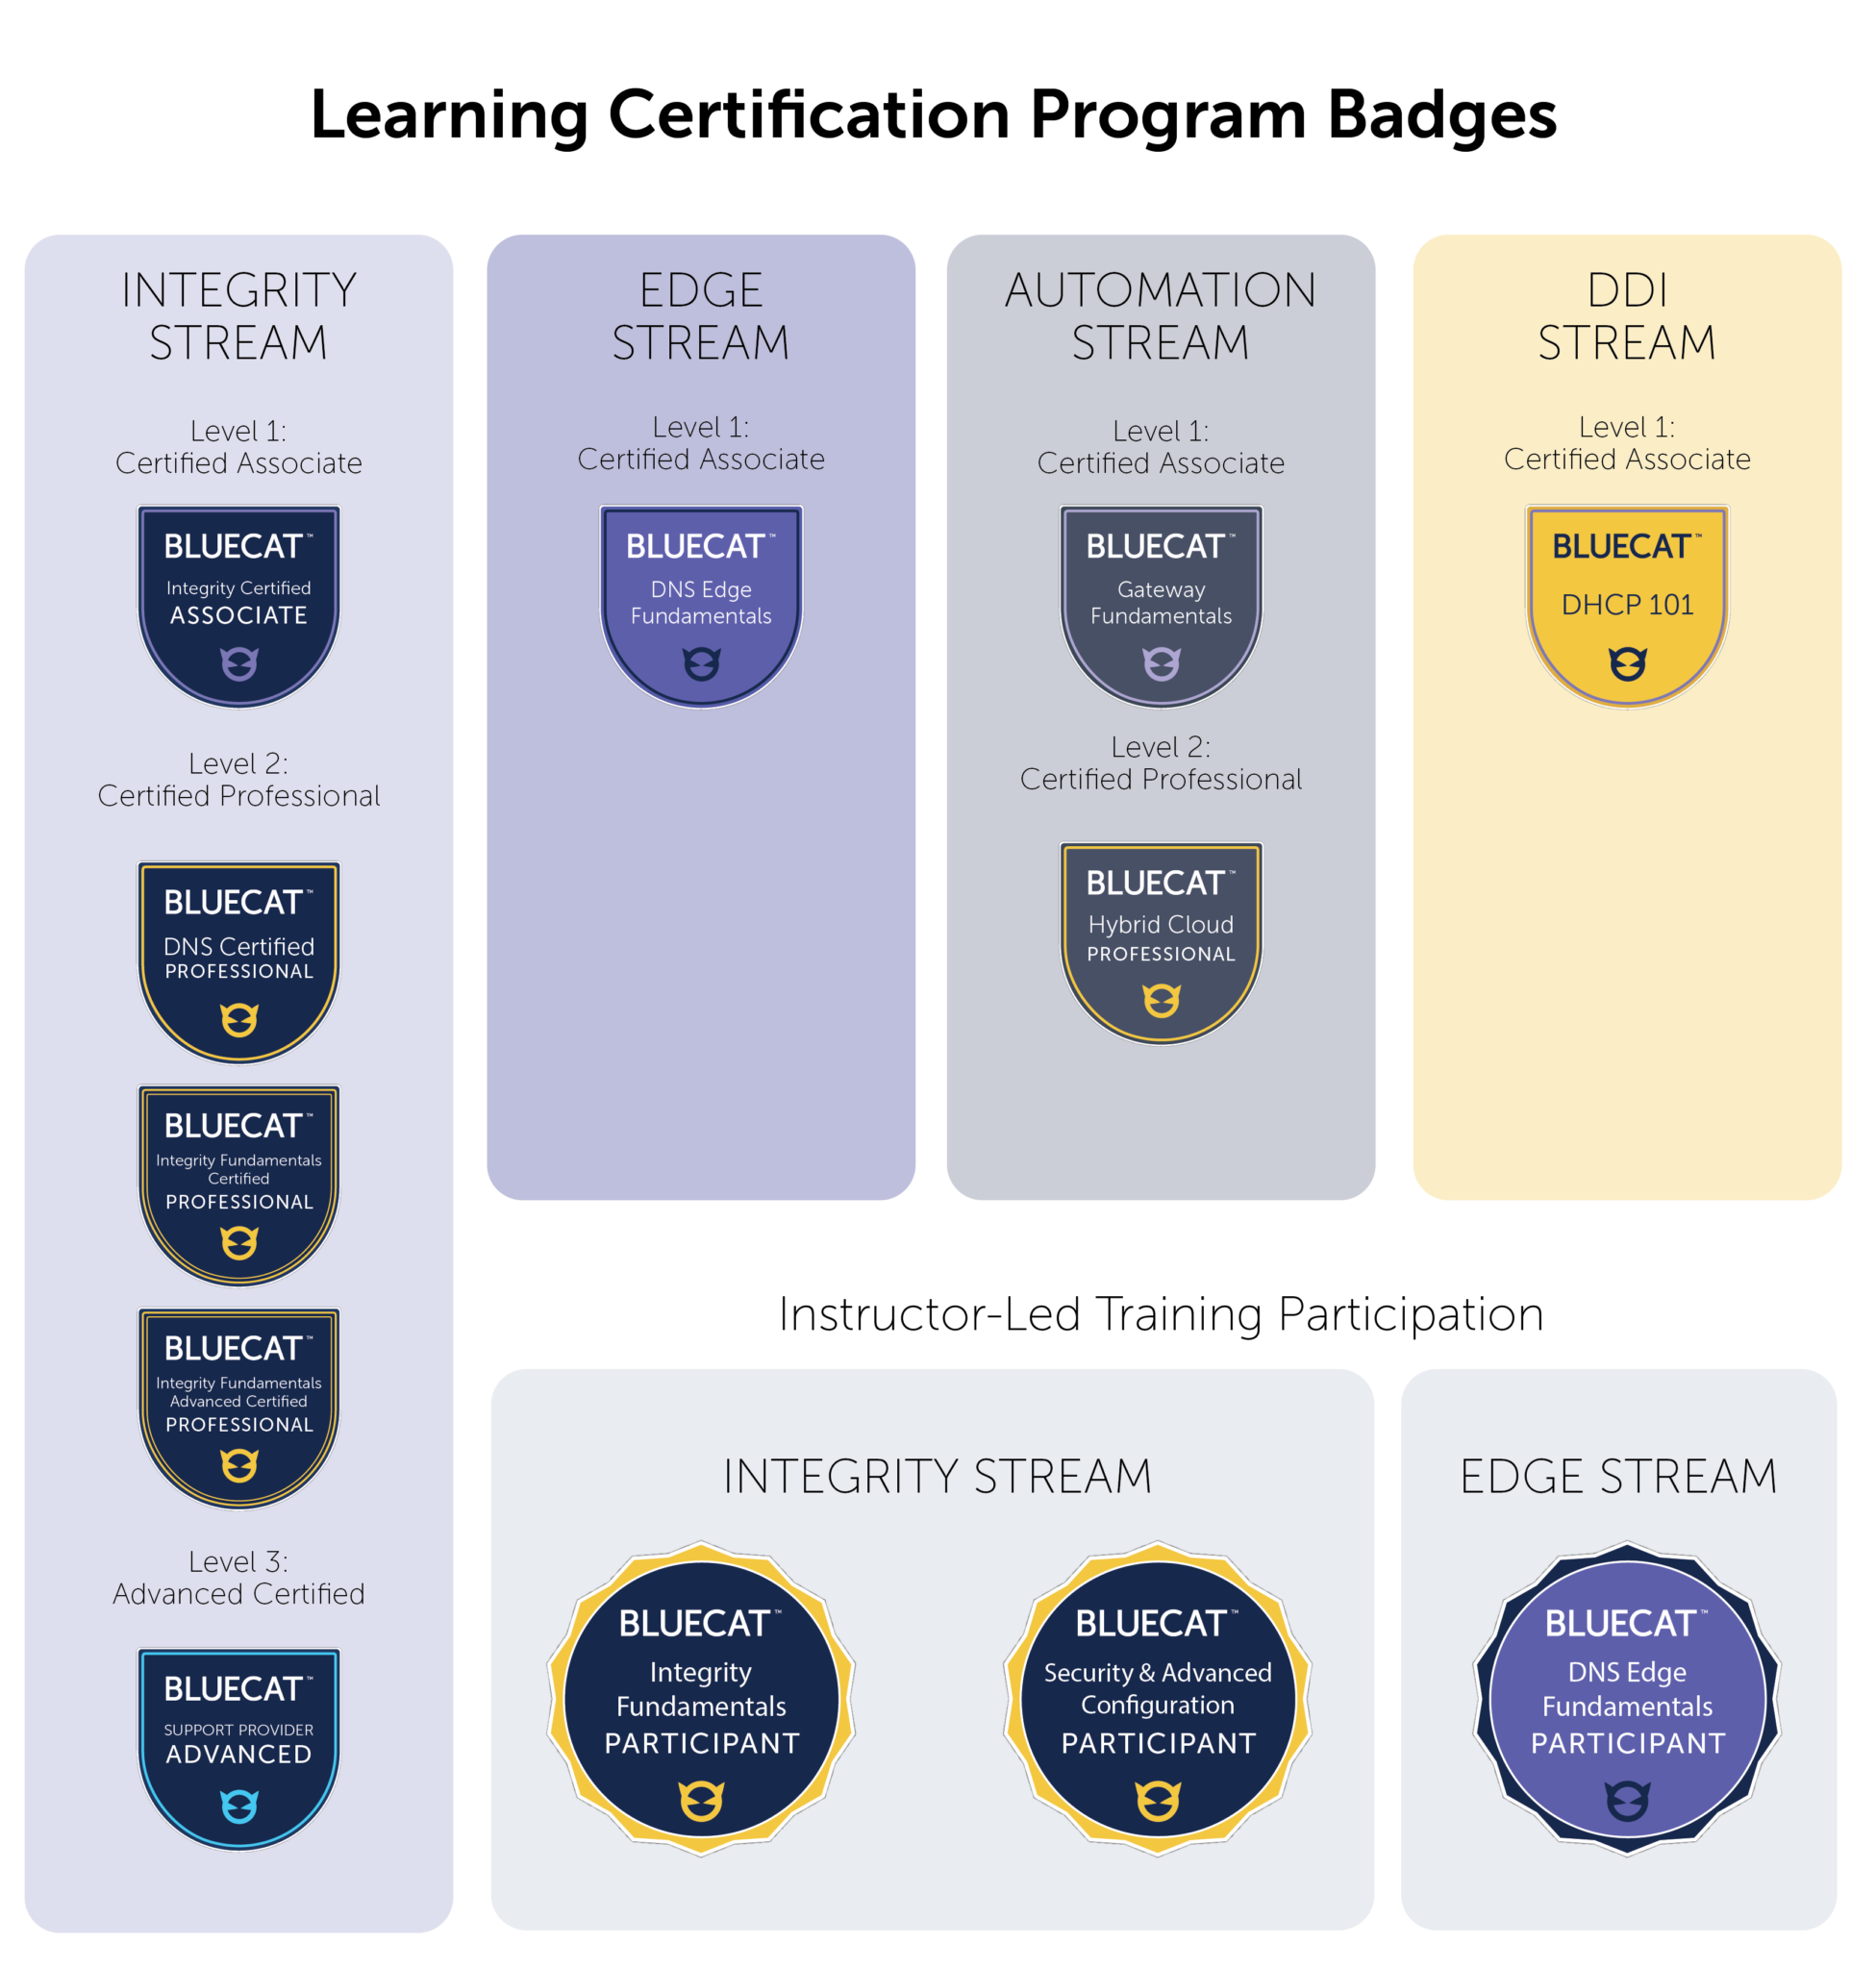 BlueCat Learning Certification Program badges for Integrity, Edge, automation, and DDI learning streams